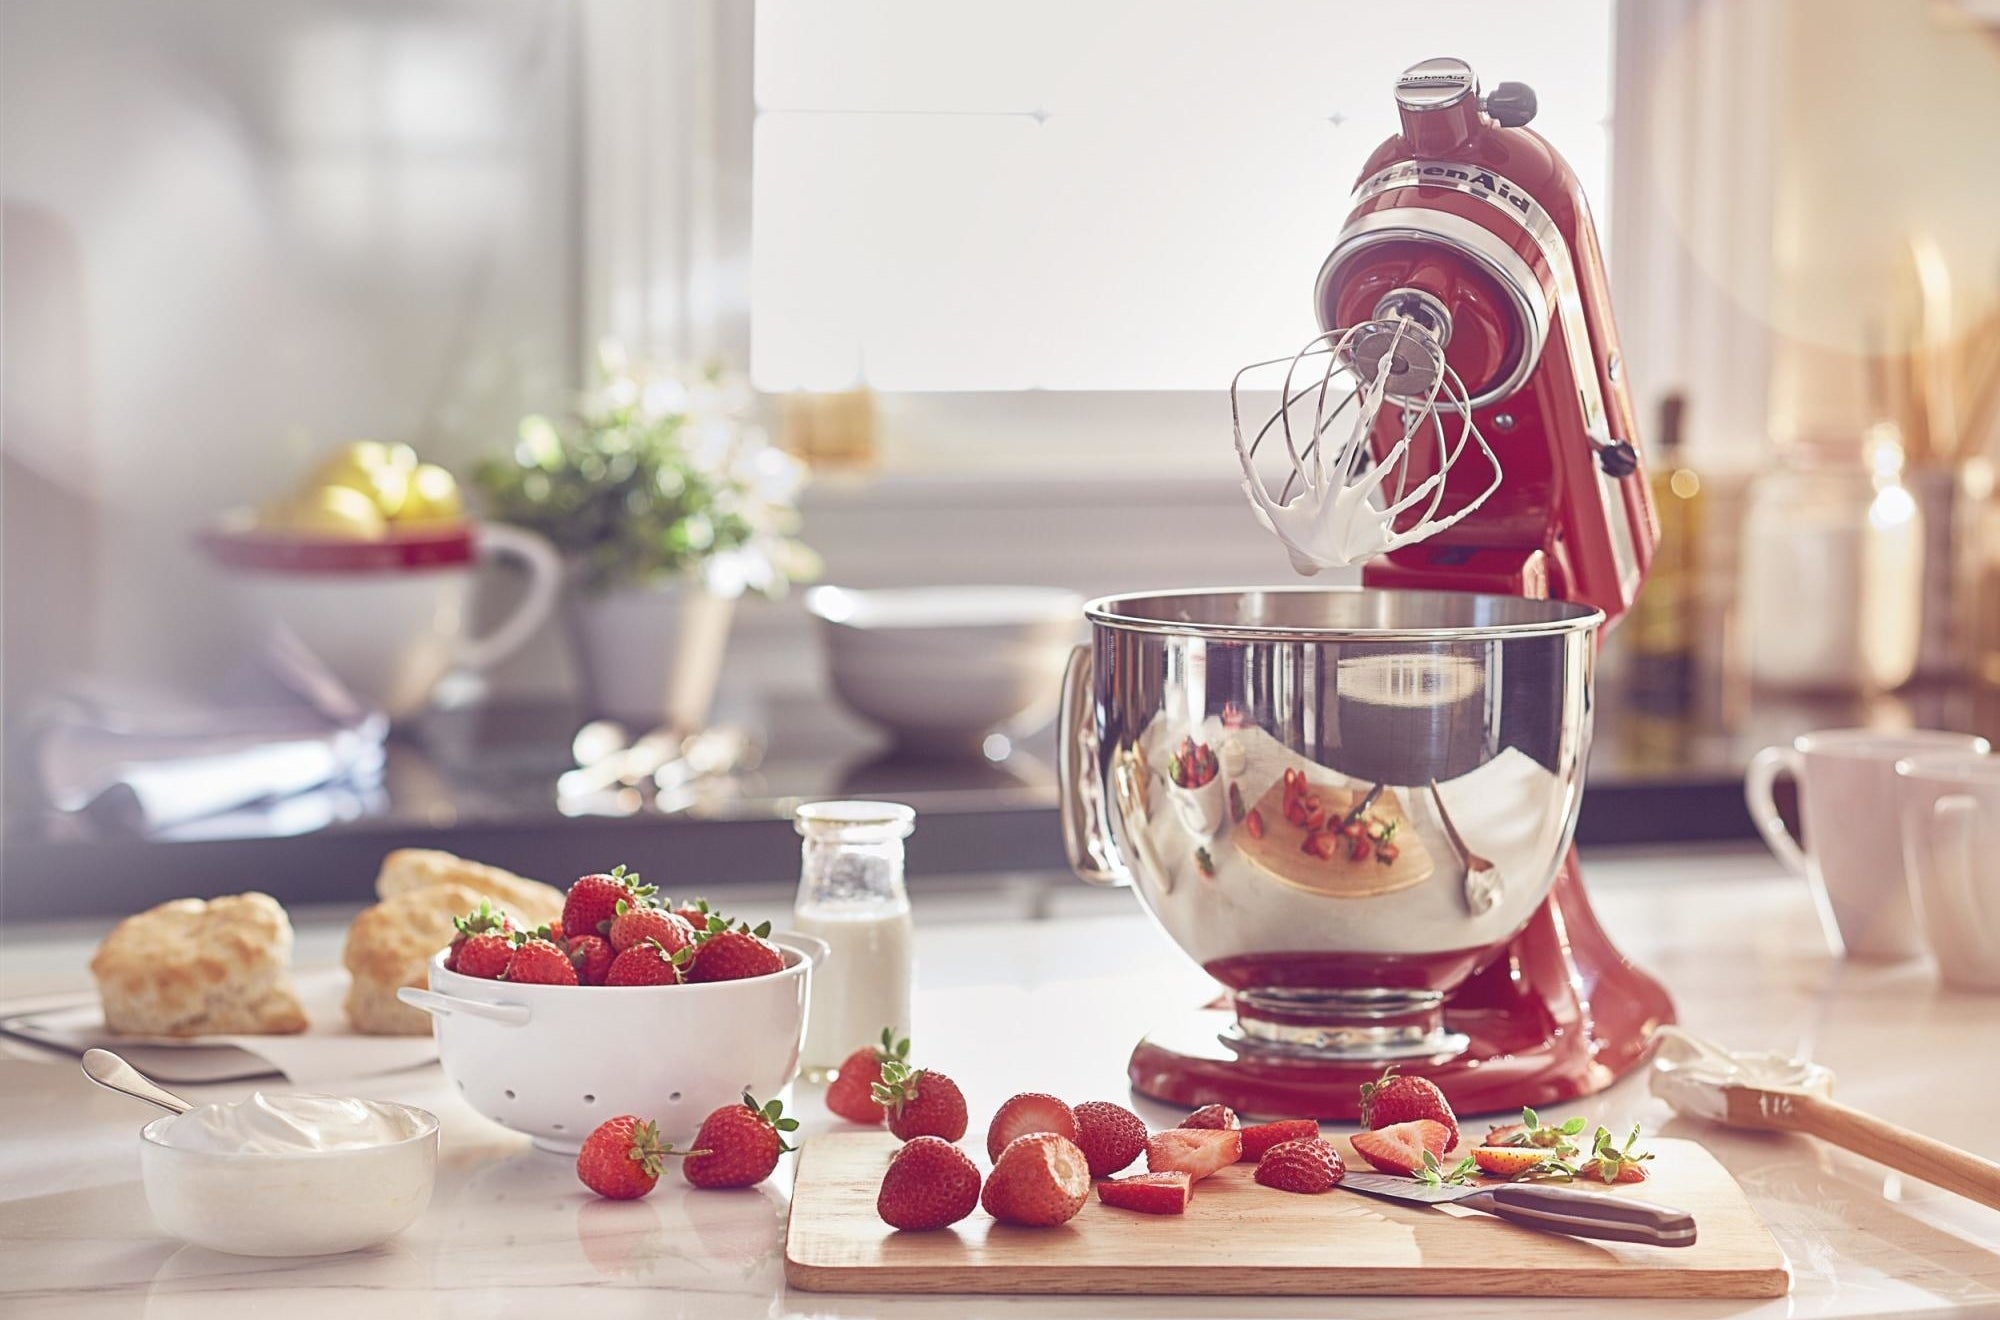 The stand mixer in red